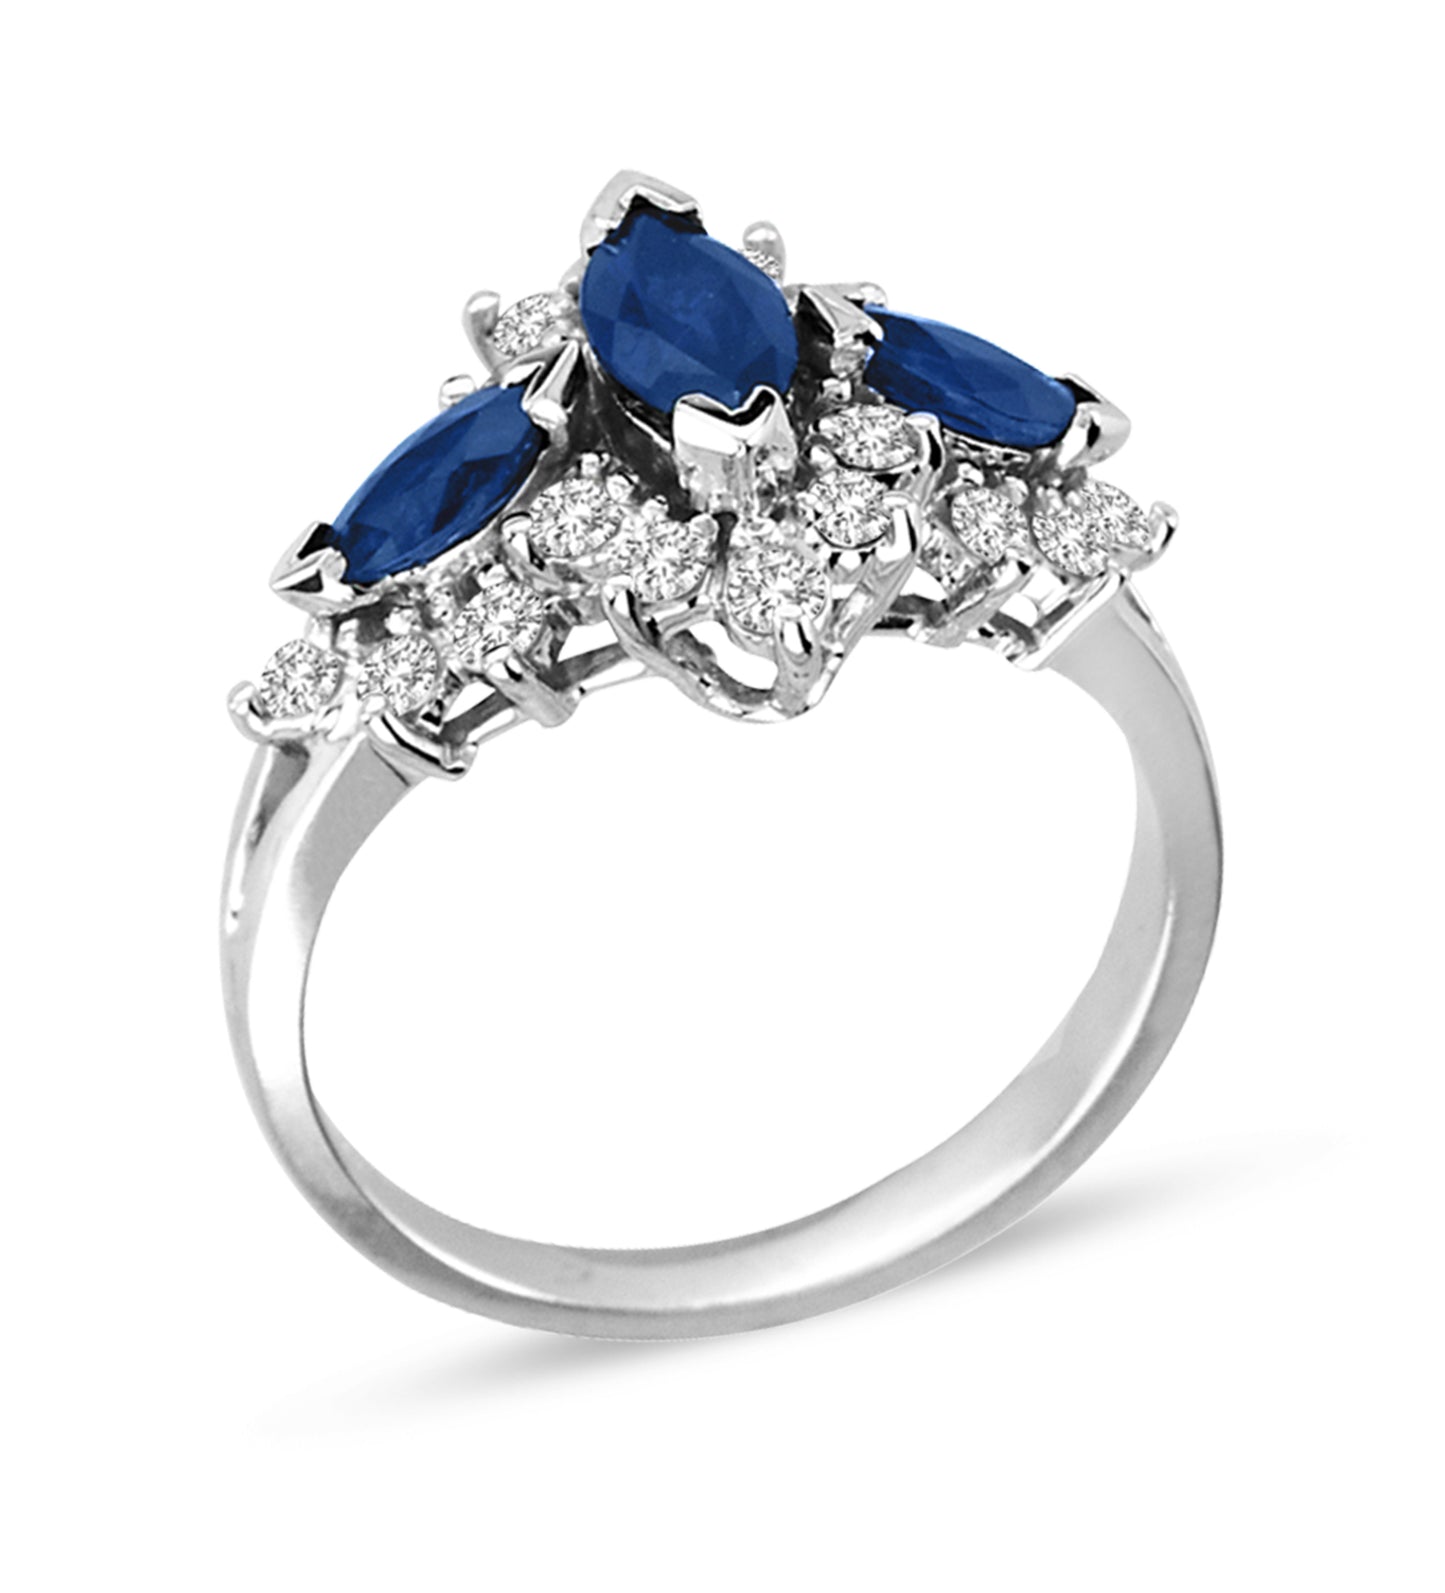 1 3/4ct Blue Sapphire & Diamond Engagement Ring in 14k White Gold